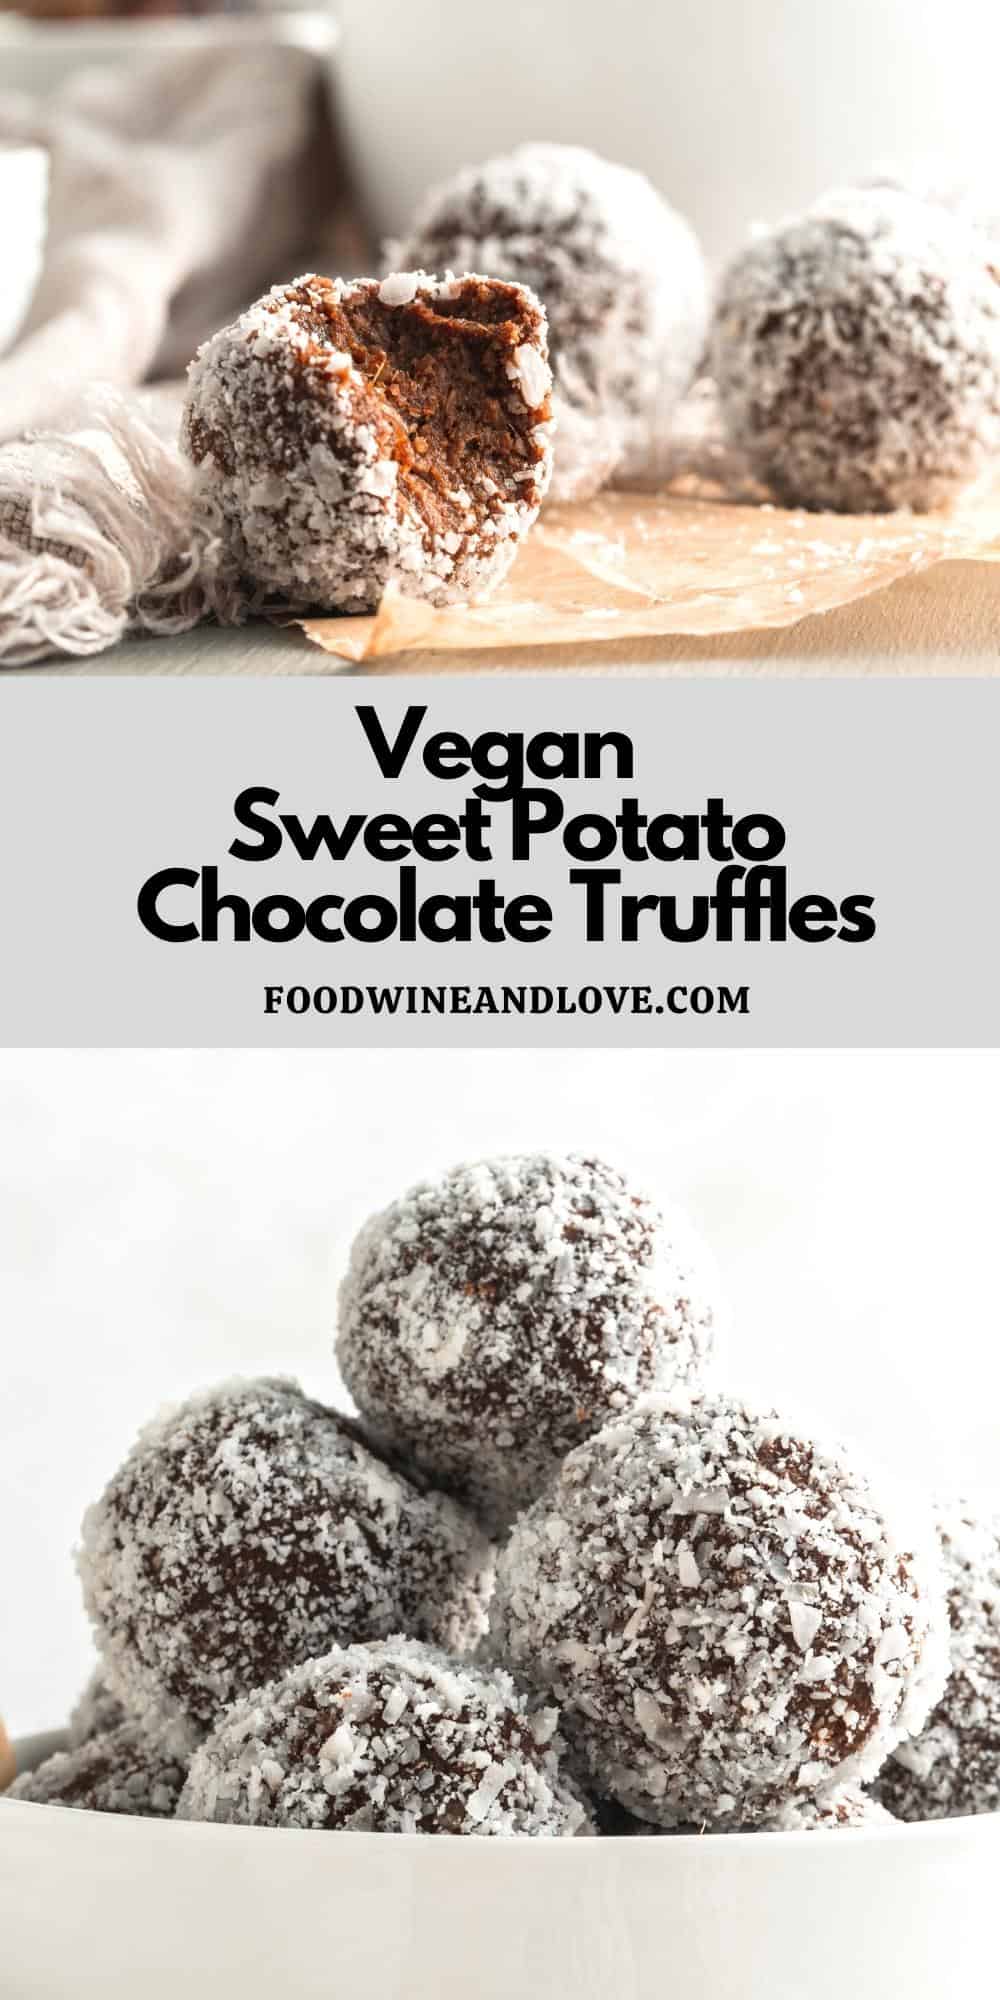 Vegan Sweet Potato Chocolate Truffles,  a simple and tasty vegan chocolate treat recipe that is made with dates and sweet potatoes.